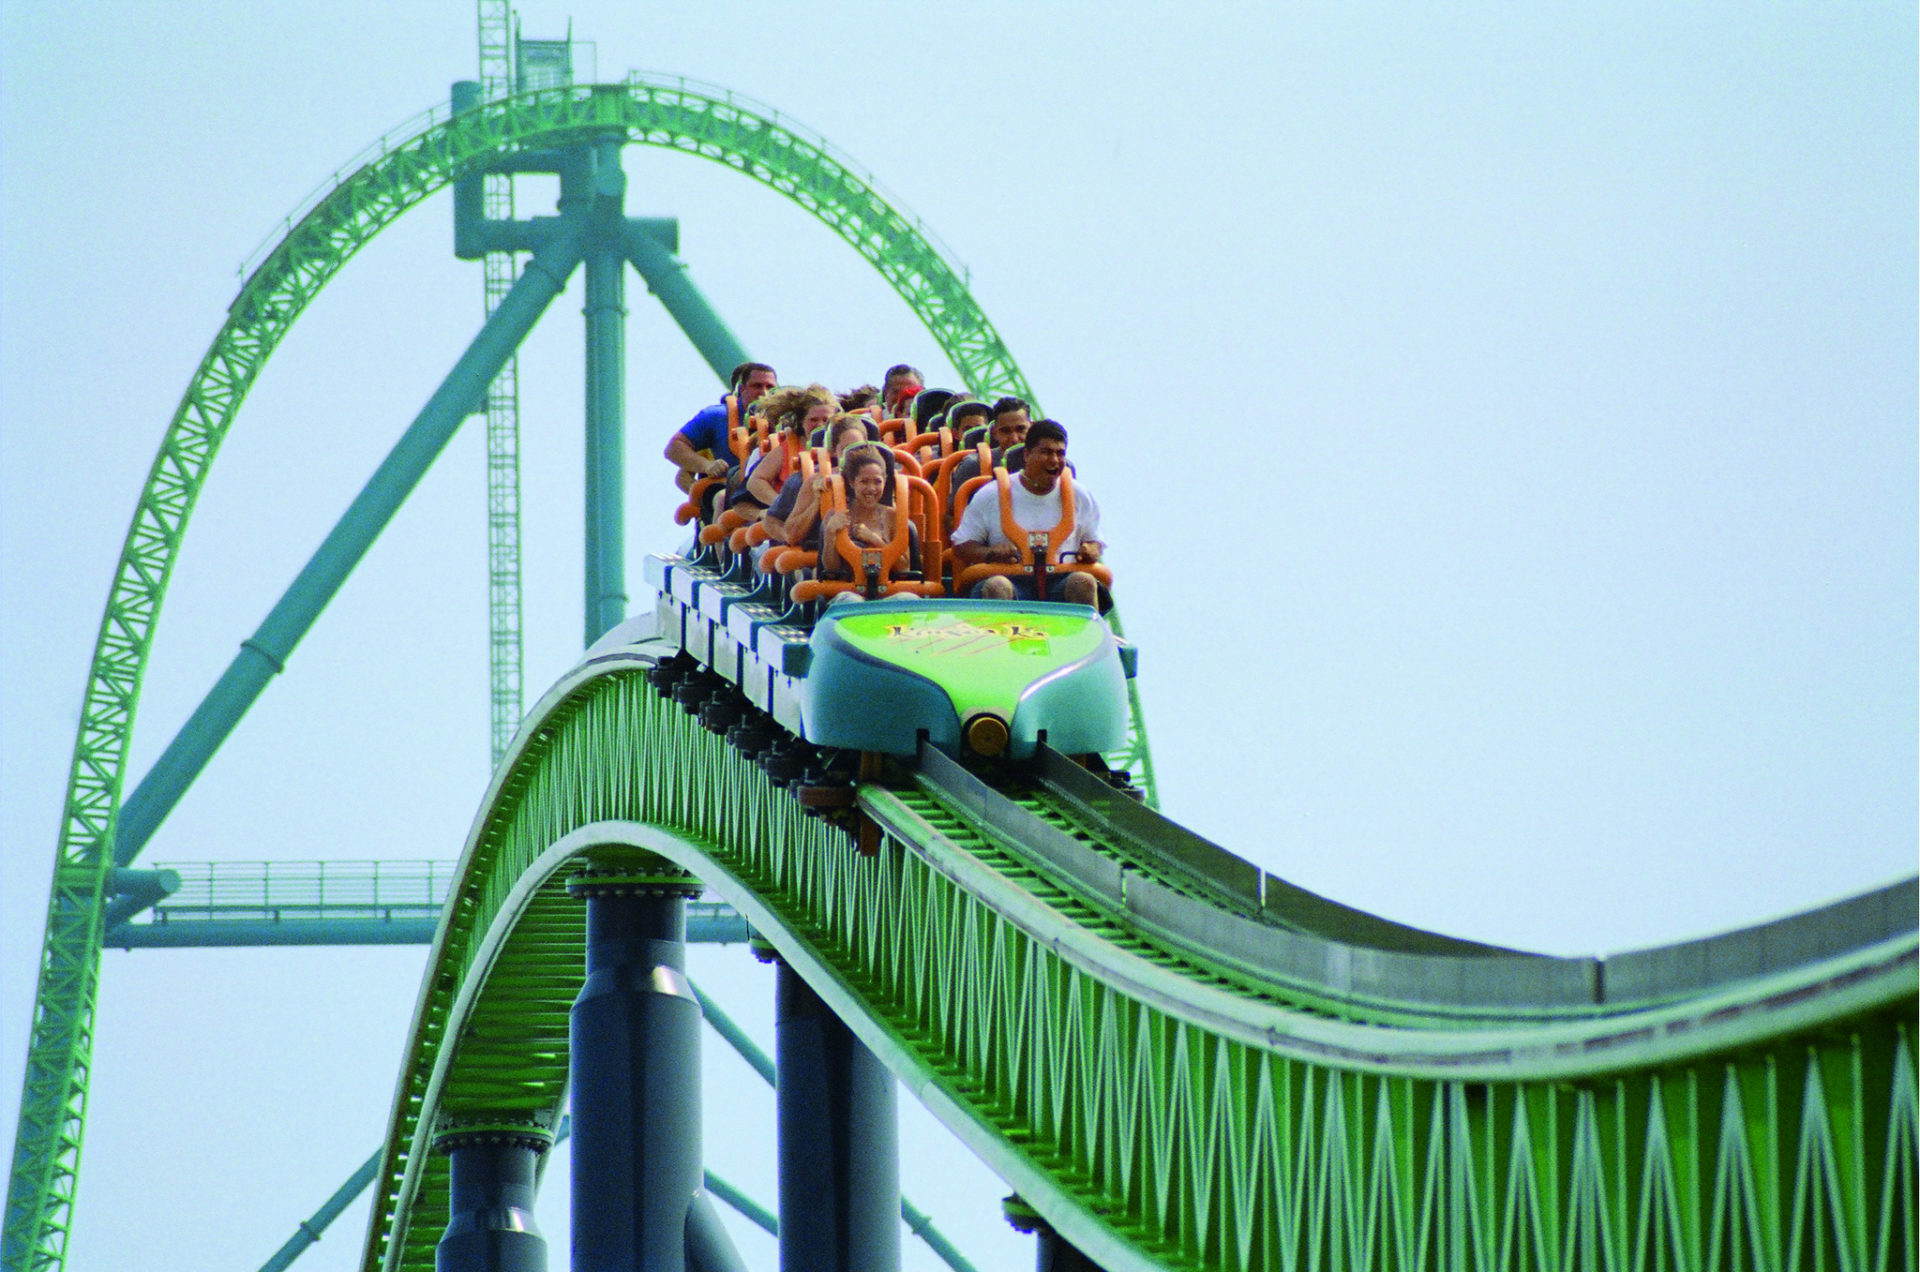 19 Thrilling Roller Coaster Facts - Facts.net